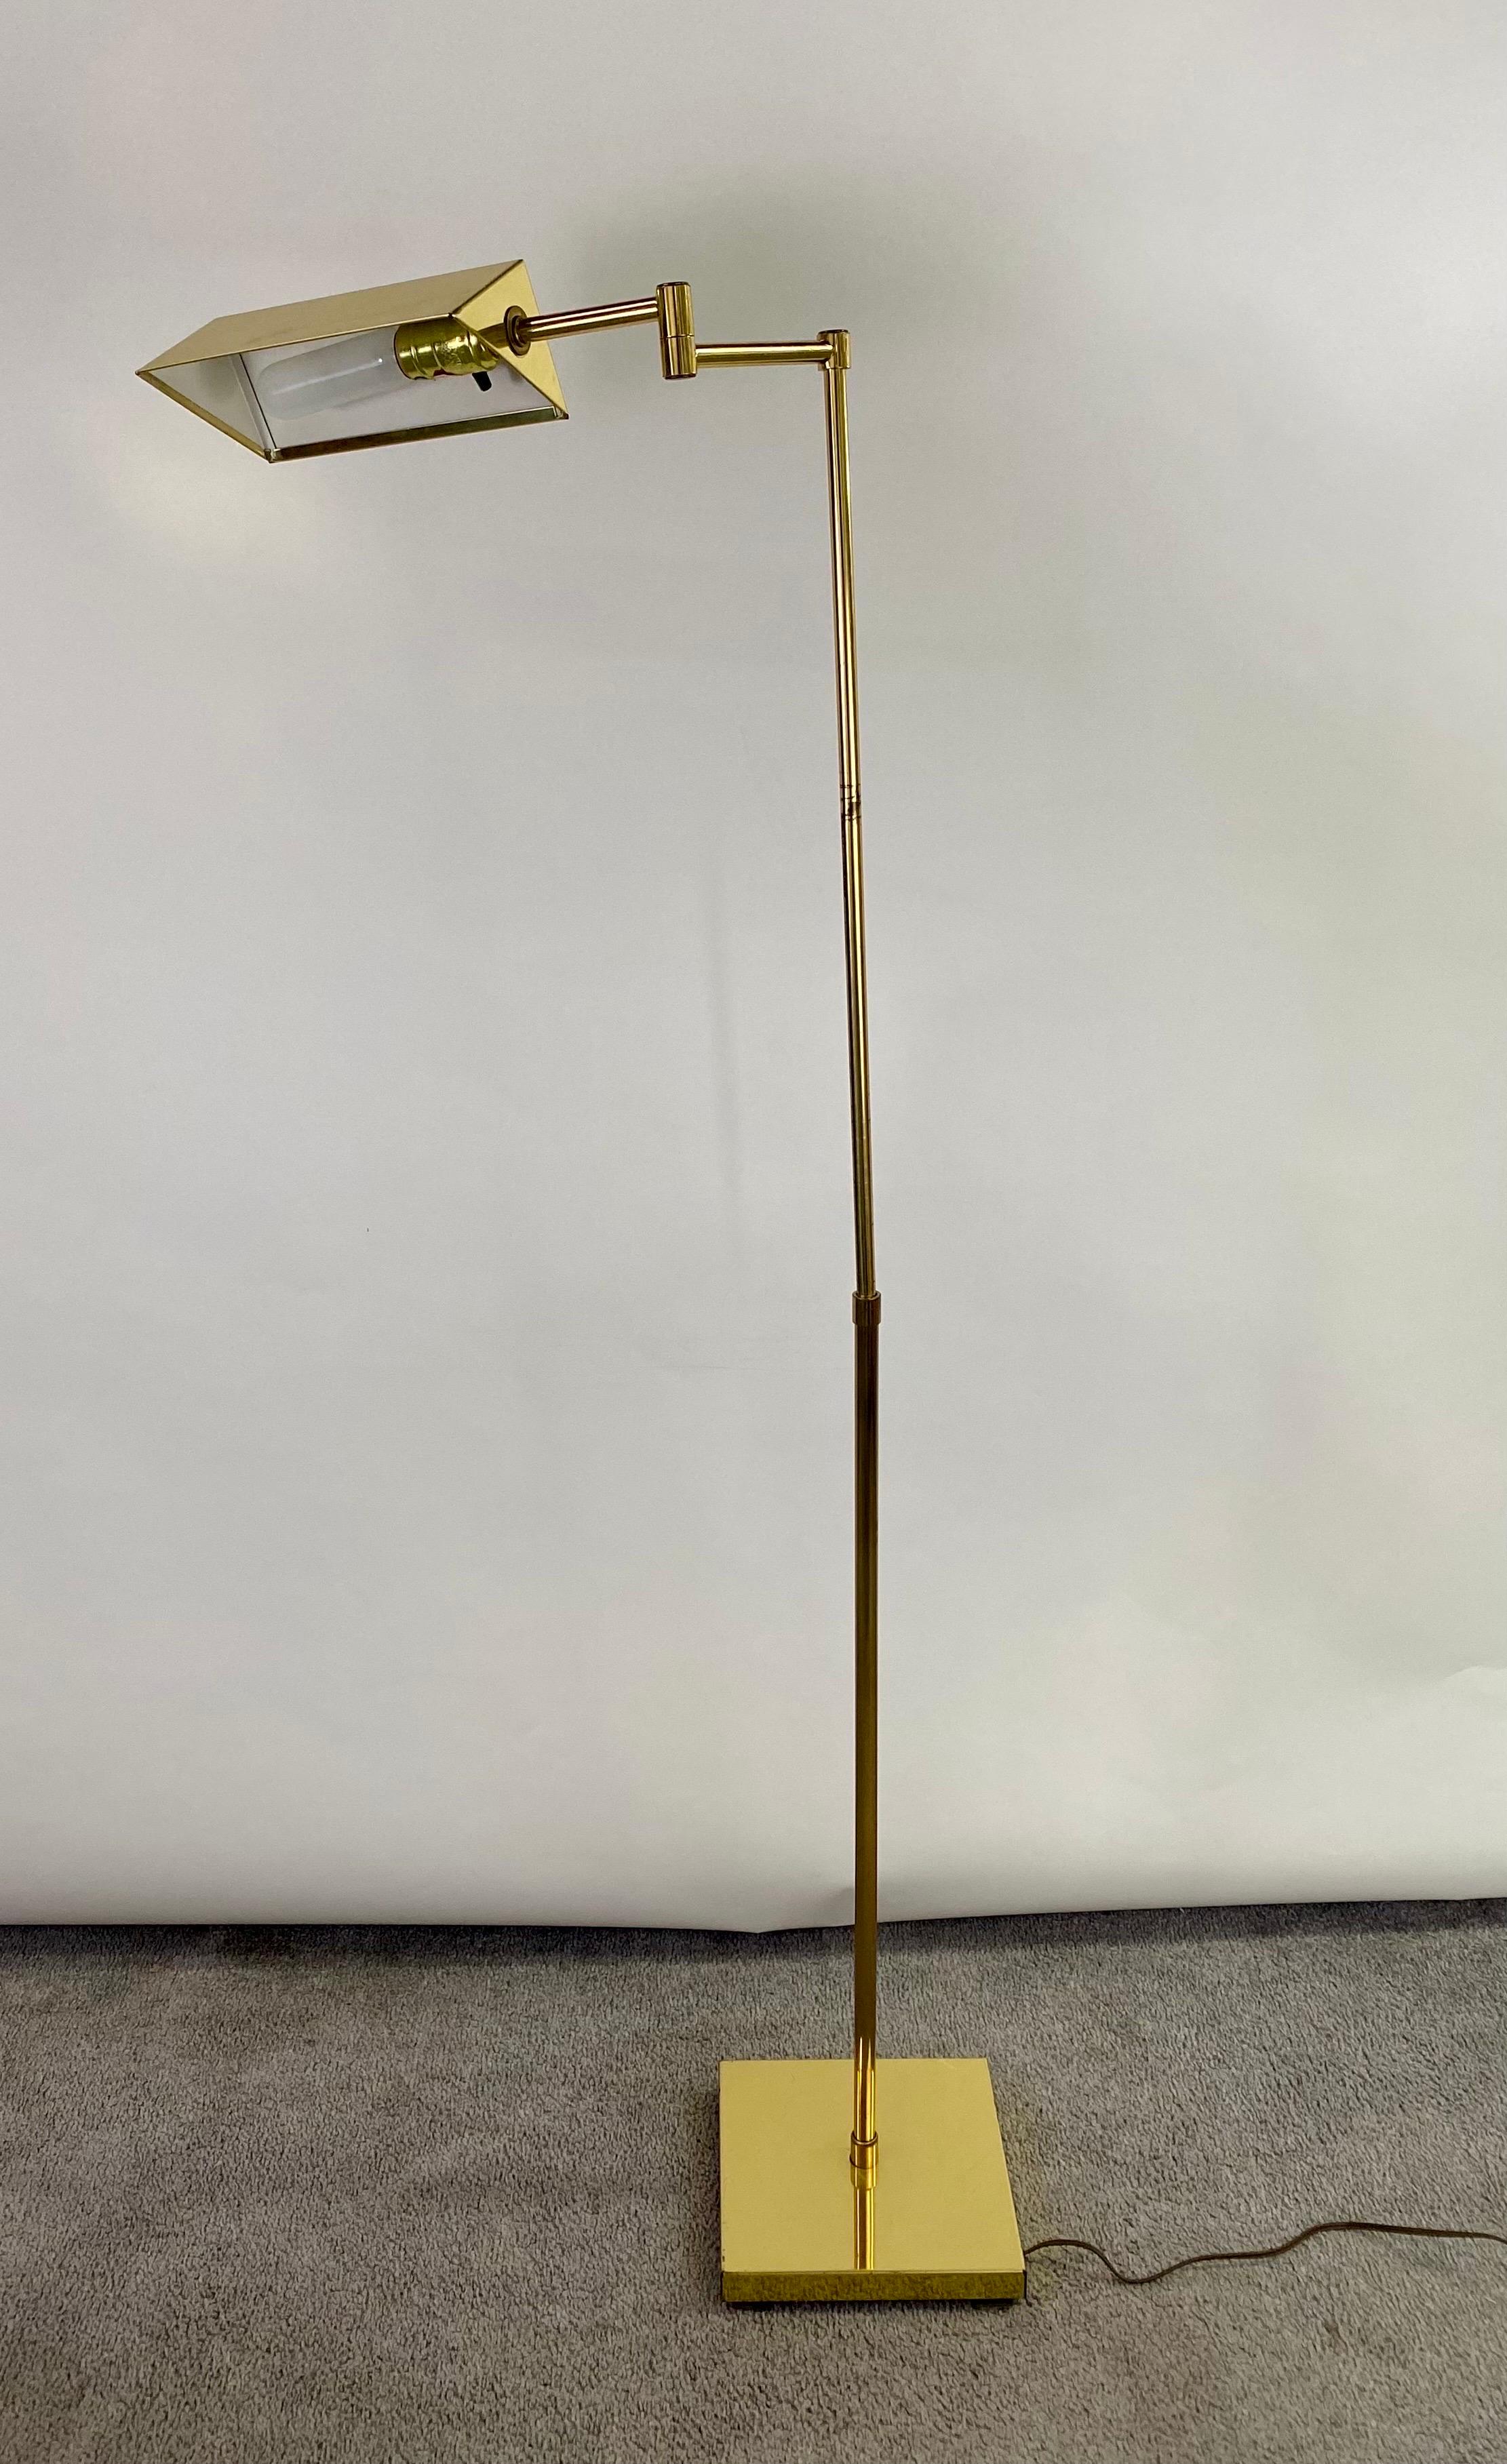  A classy Mid-Century Modern pharmacy floor lamp made of brass. The lamp features an adjustable column supported by a square brass base. The shade has a tented shape and swivels from one side to the other.  The mid-century modern pharmacy floor lamp